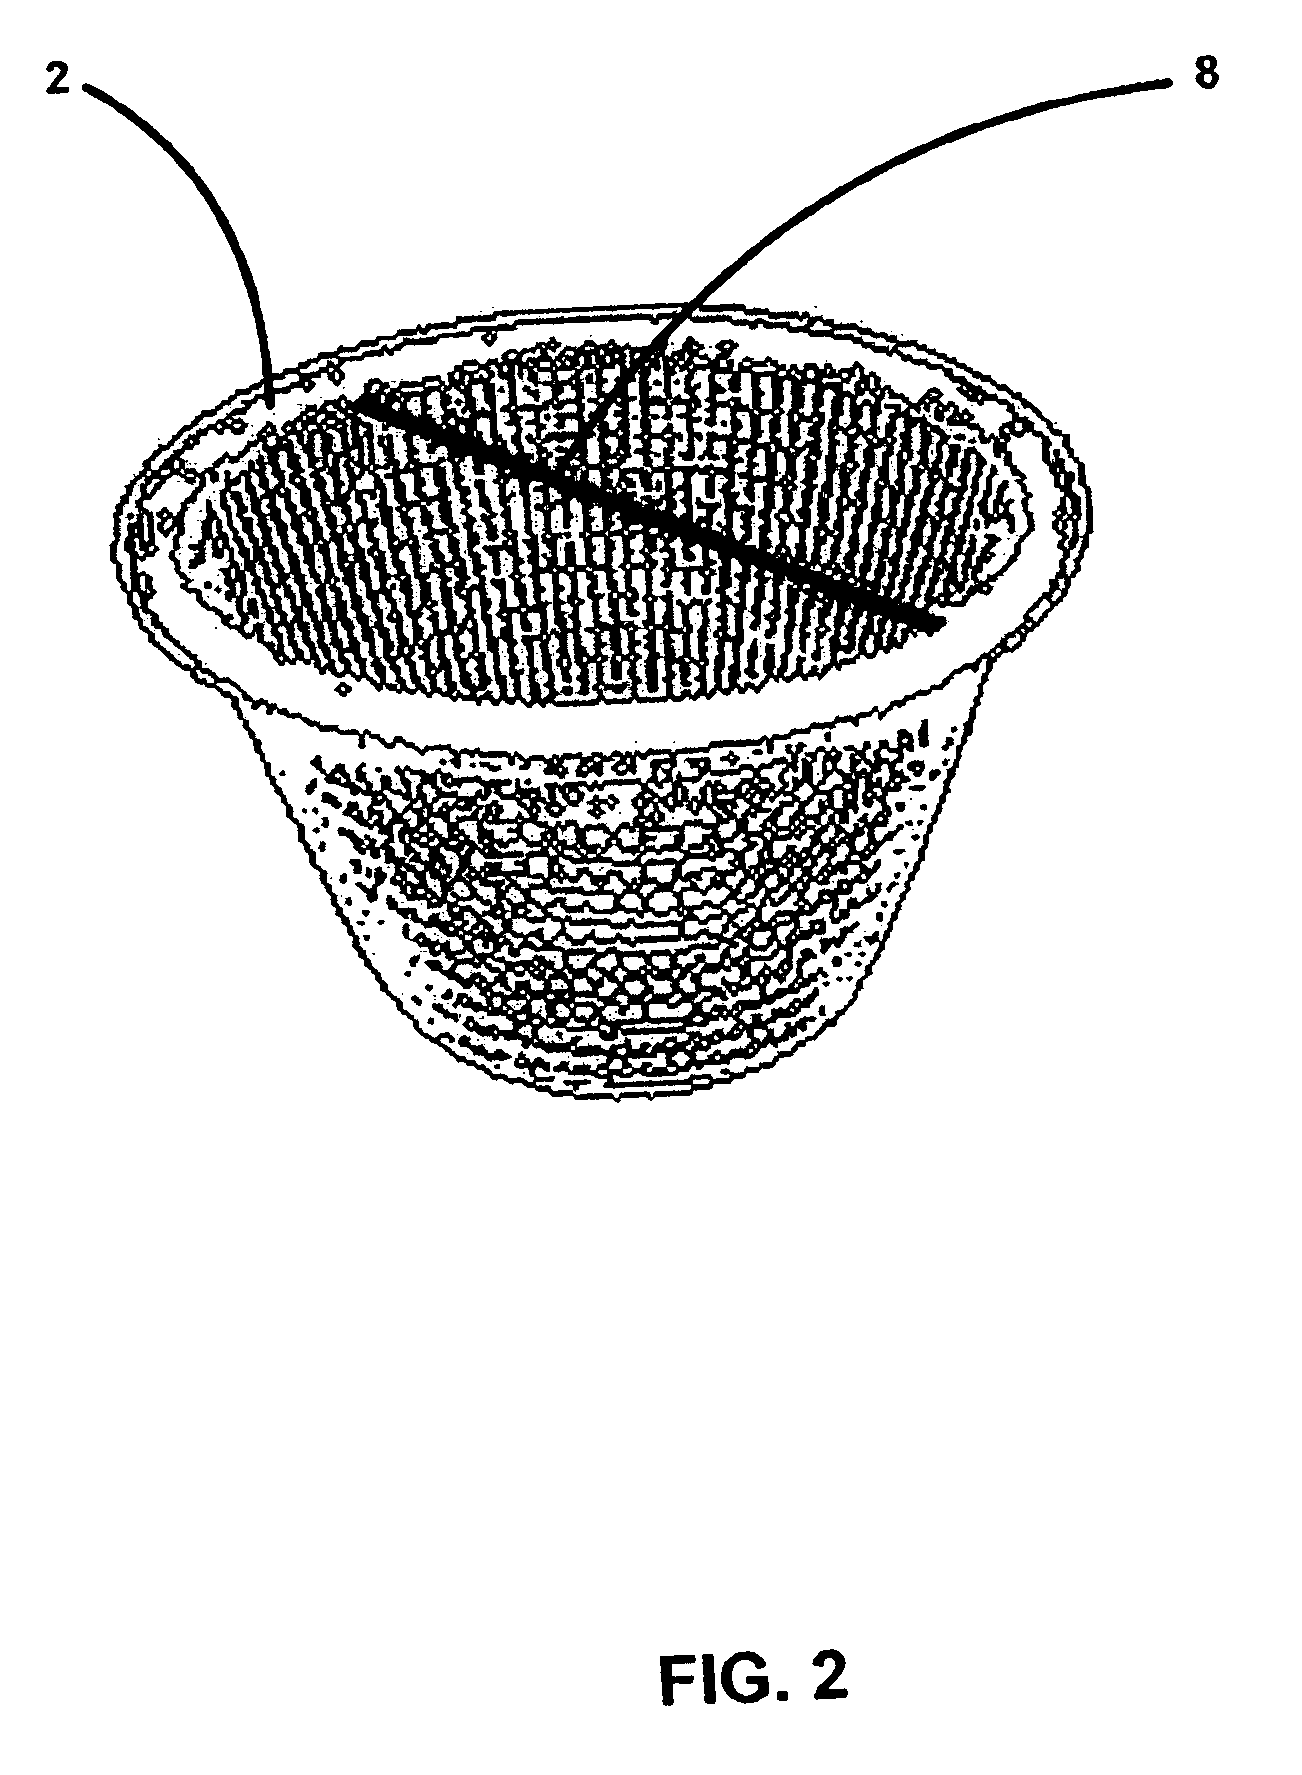 Device and method for lifting a pool skimmer basket